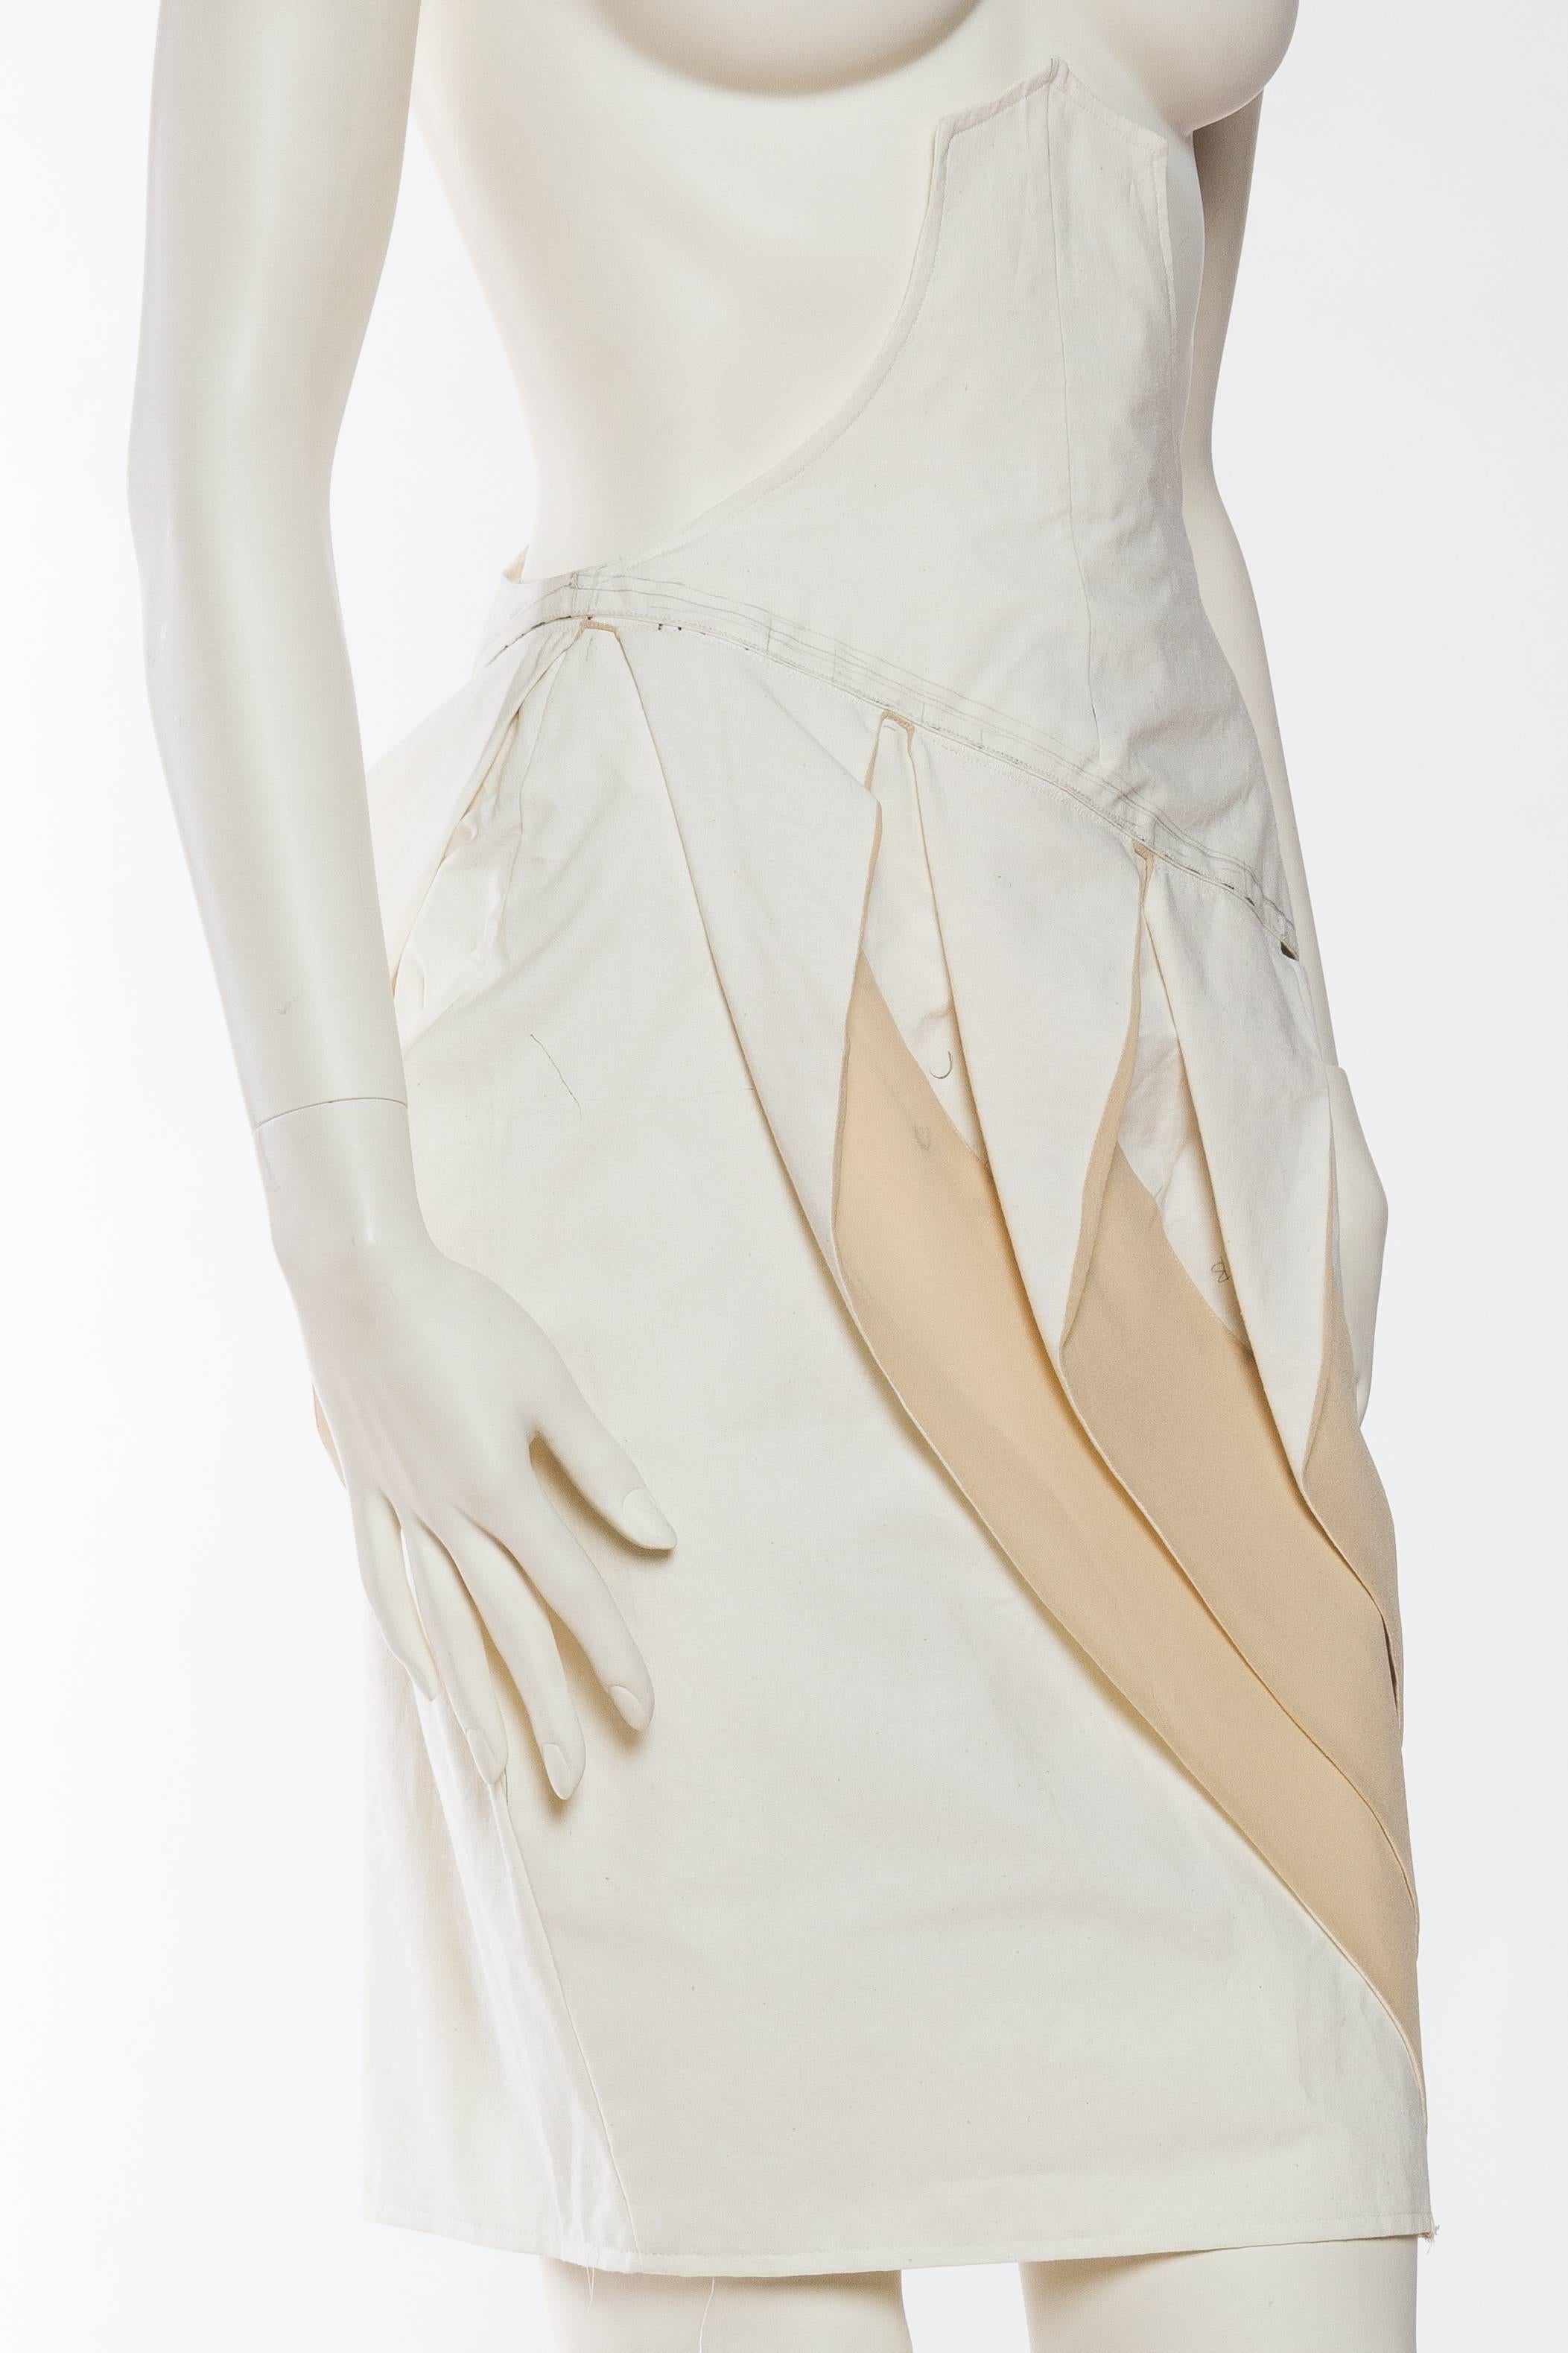 Women's 2000S JOHN GALLIANO Working Muslin Sample Skirt From Galliano's Archive For Sale